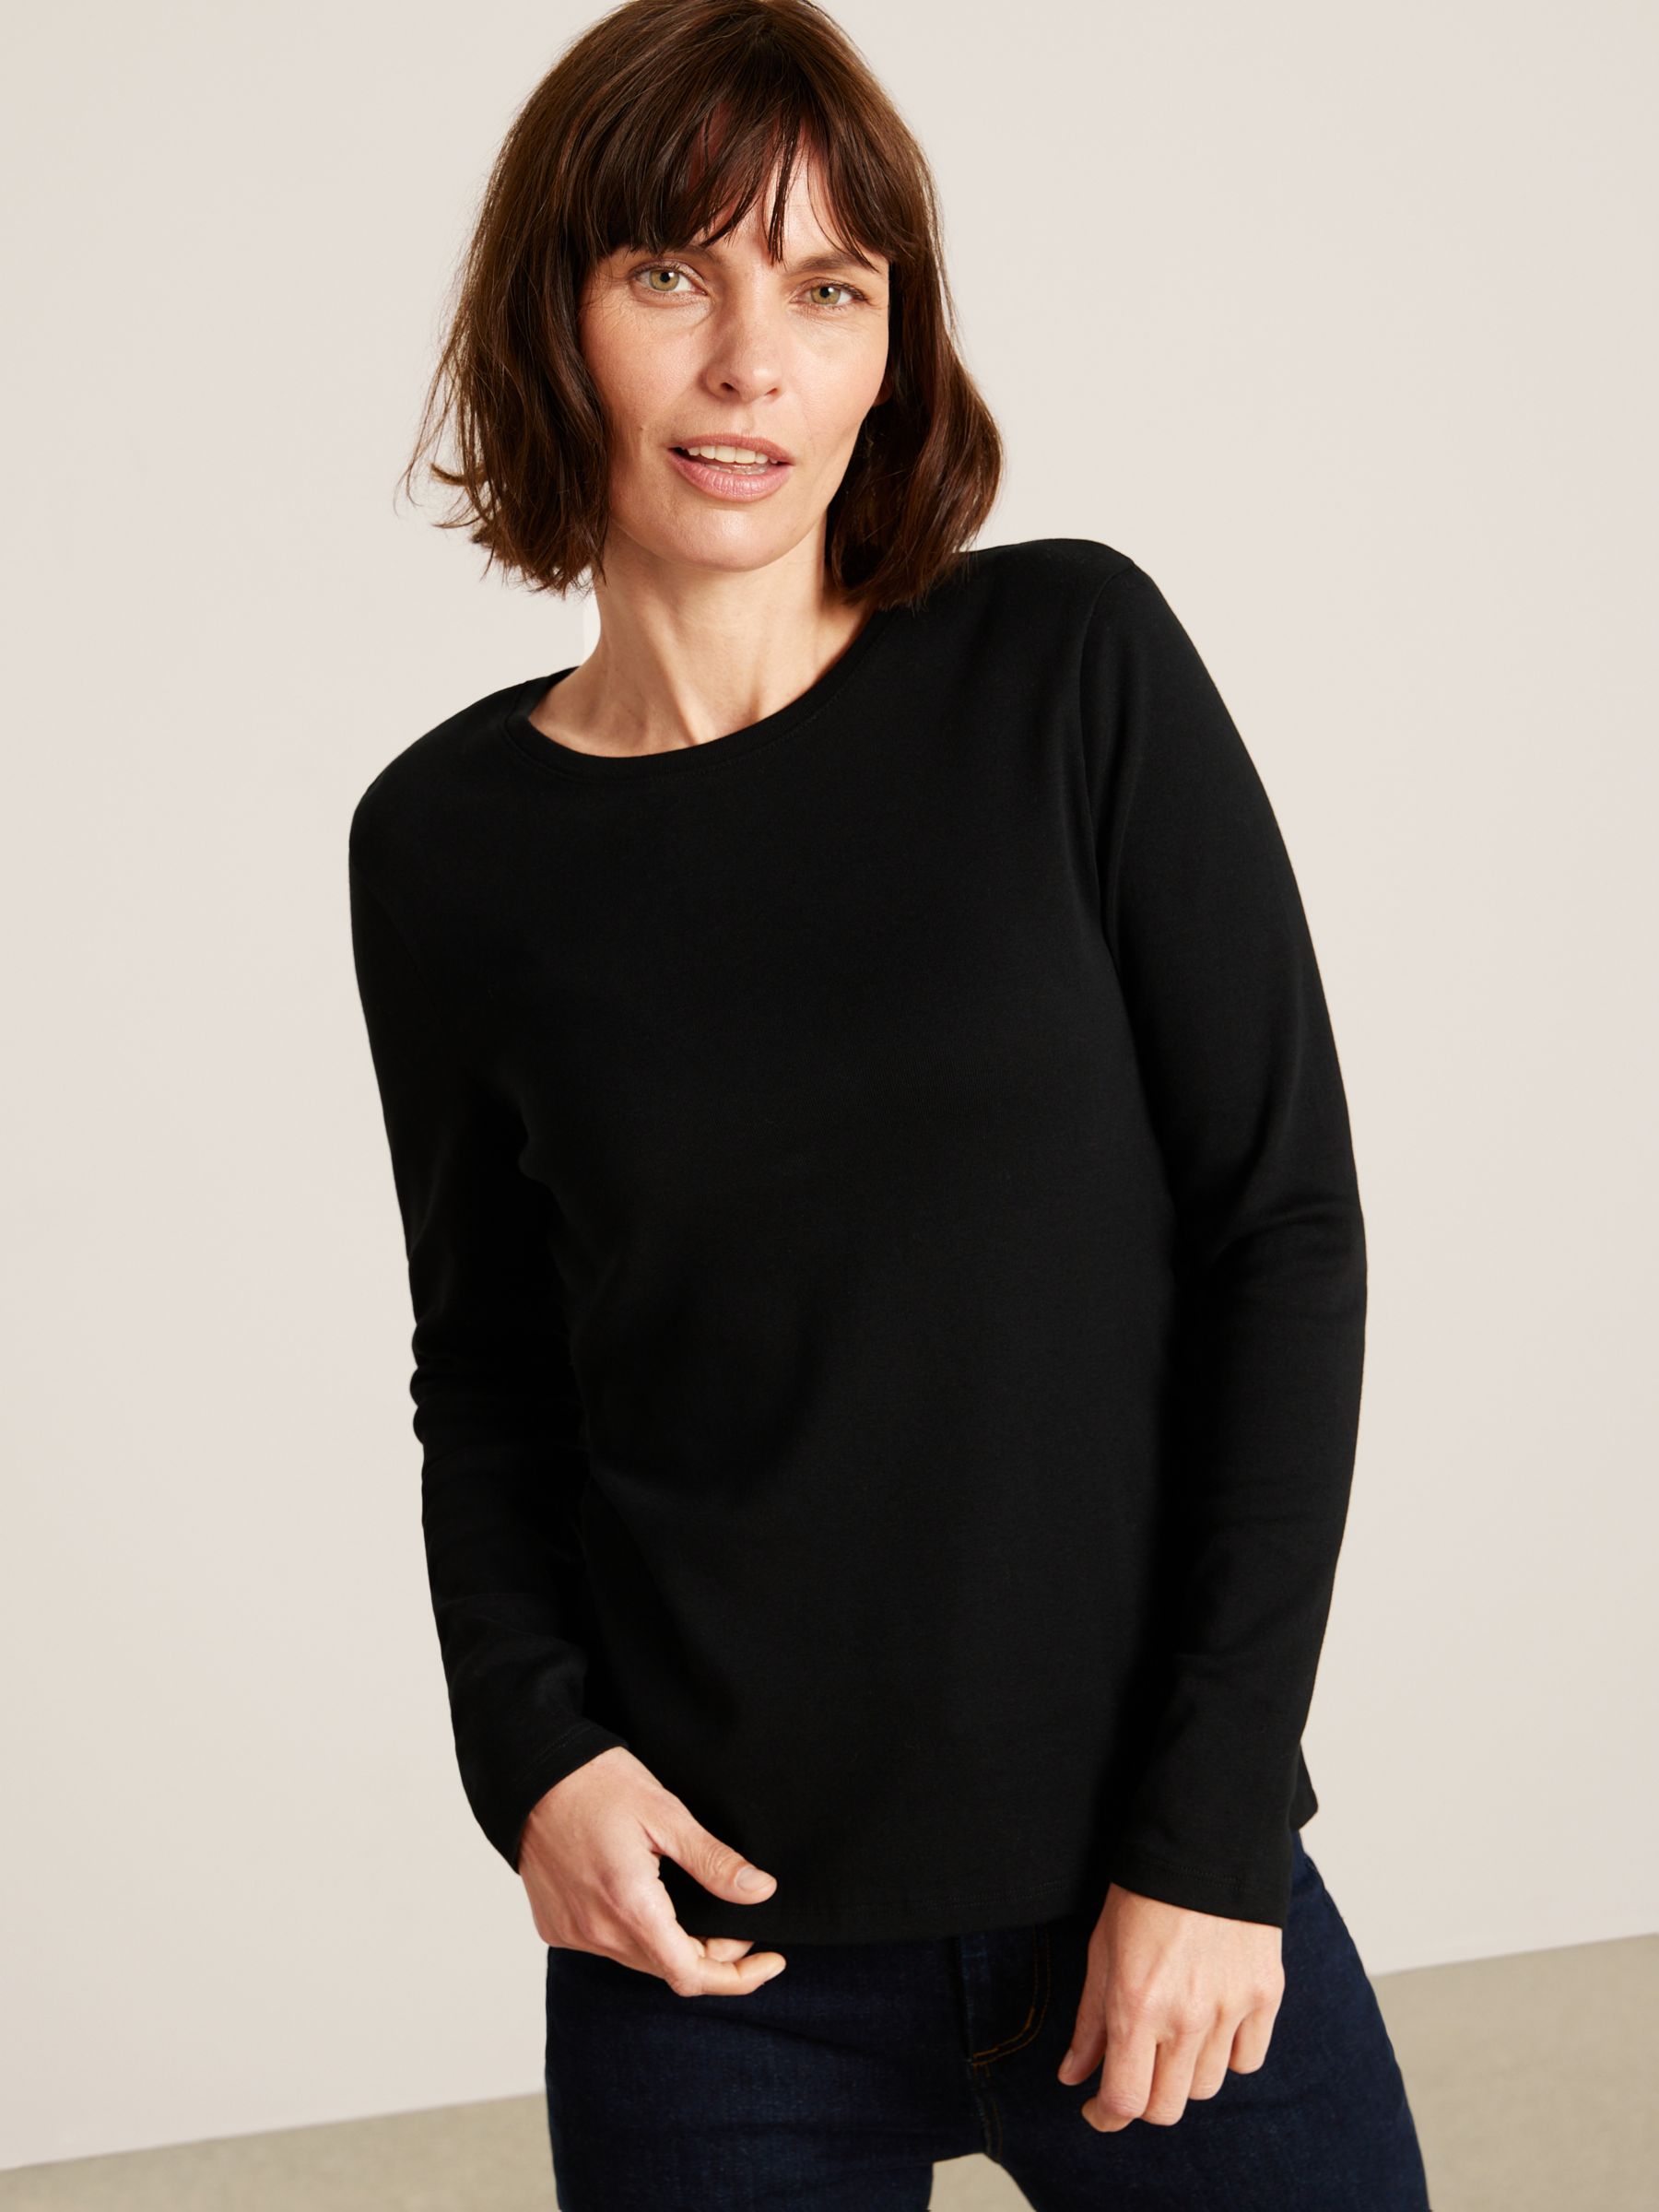 Wool Round-neck Knit Top in Black P.A.R.O.S.H Womens Clothing Tops Short-sleeve tops 